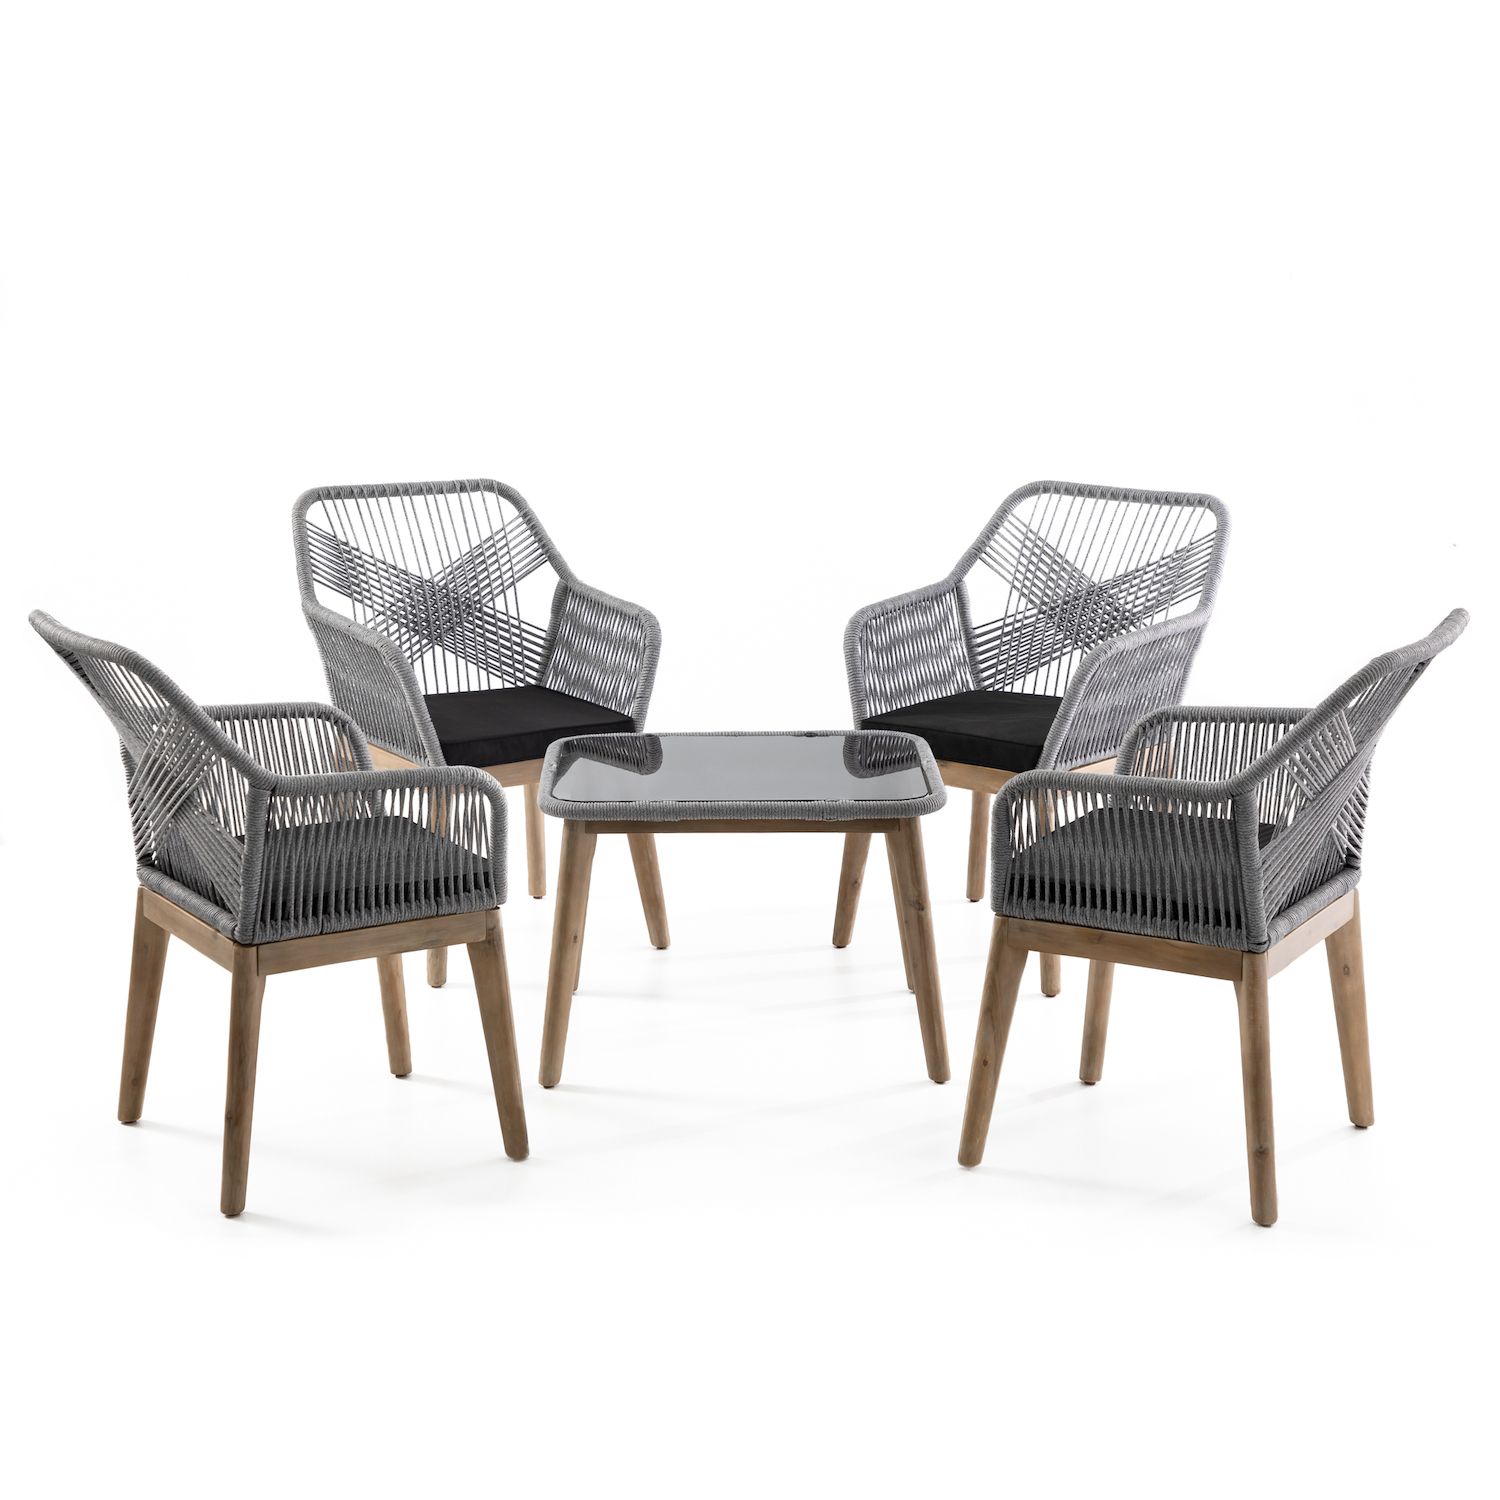 Image for Dream Collection Woven Rope Outdoor Conversation Chair & End Table 5-piece Set at Kohl's.